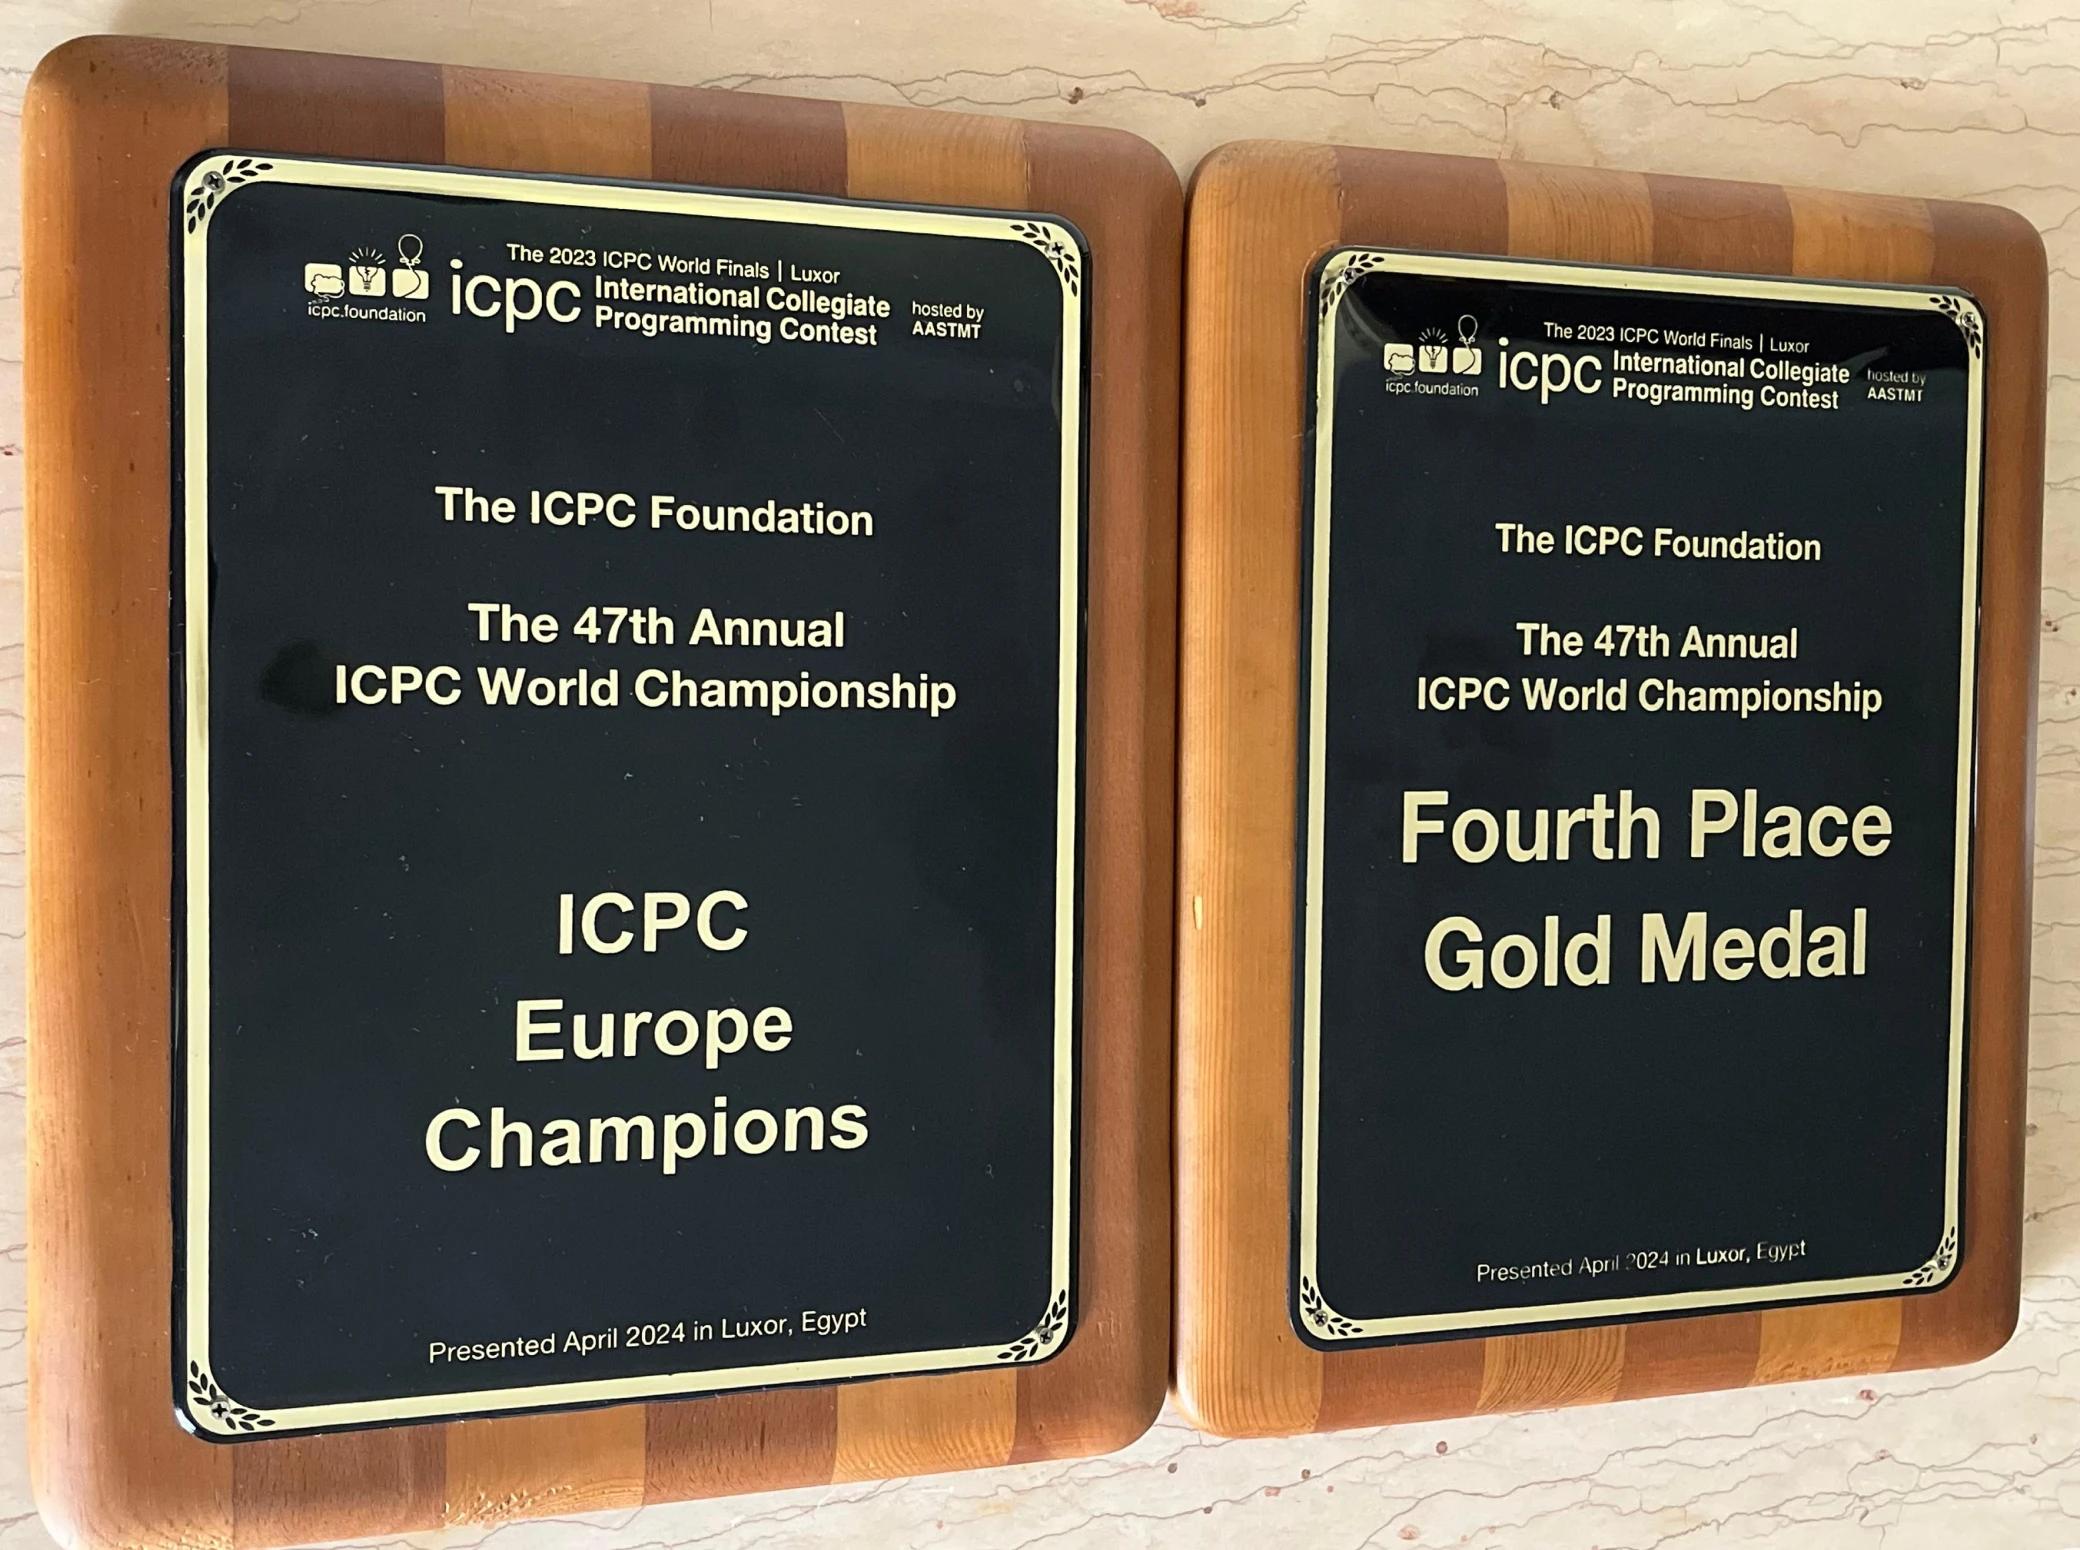 Harbour.Space University - ICPC Europe Champions and 4th Place Gold Medal